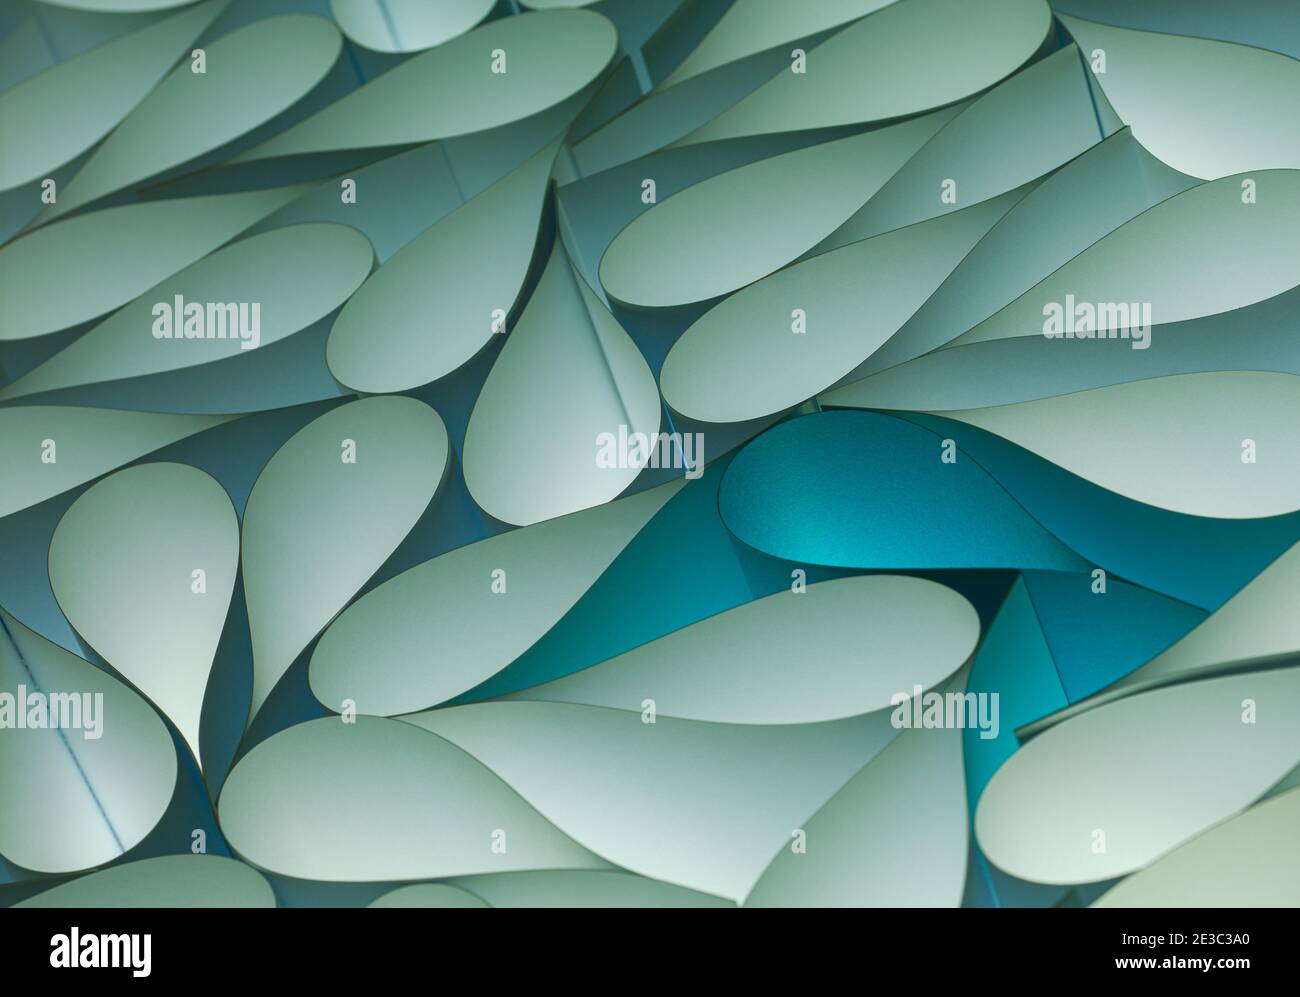 Background macro image of origami pattern made of curved sheets of paper. Stock Photo